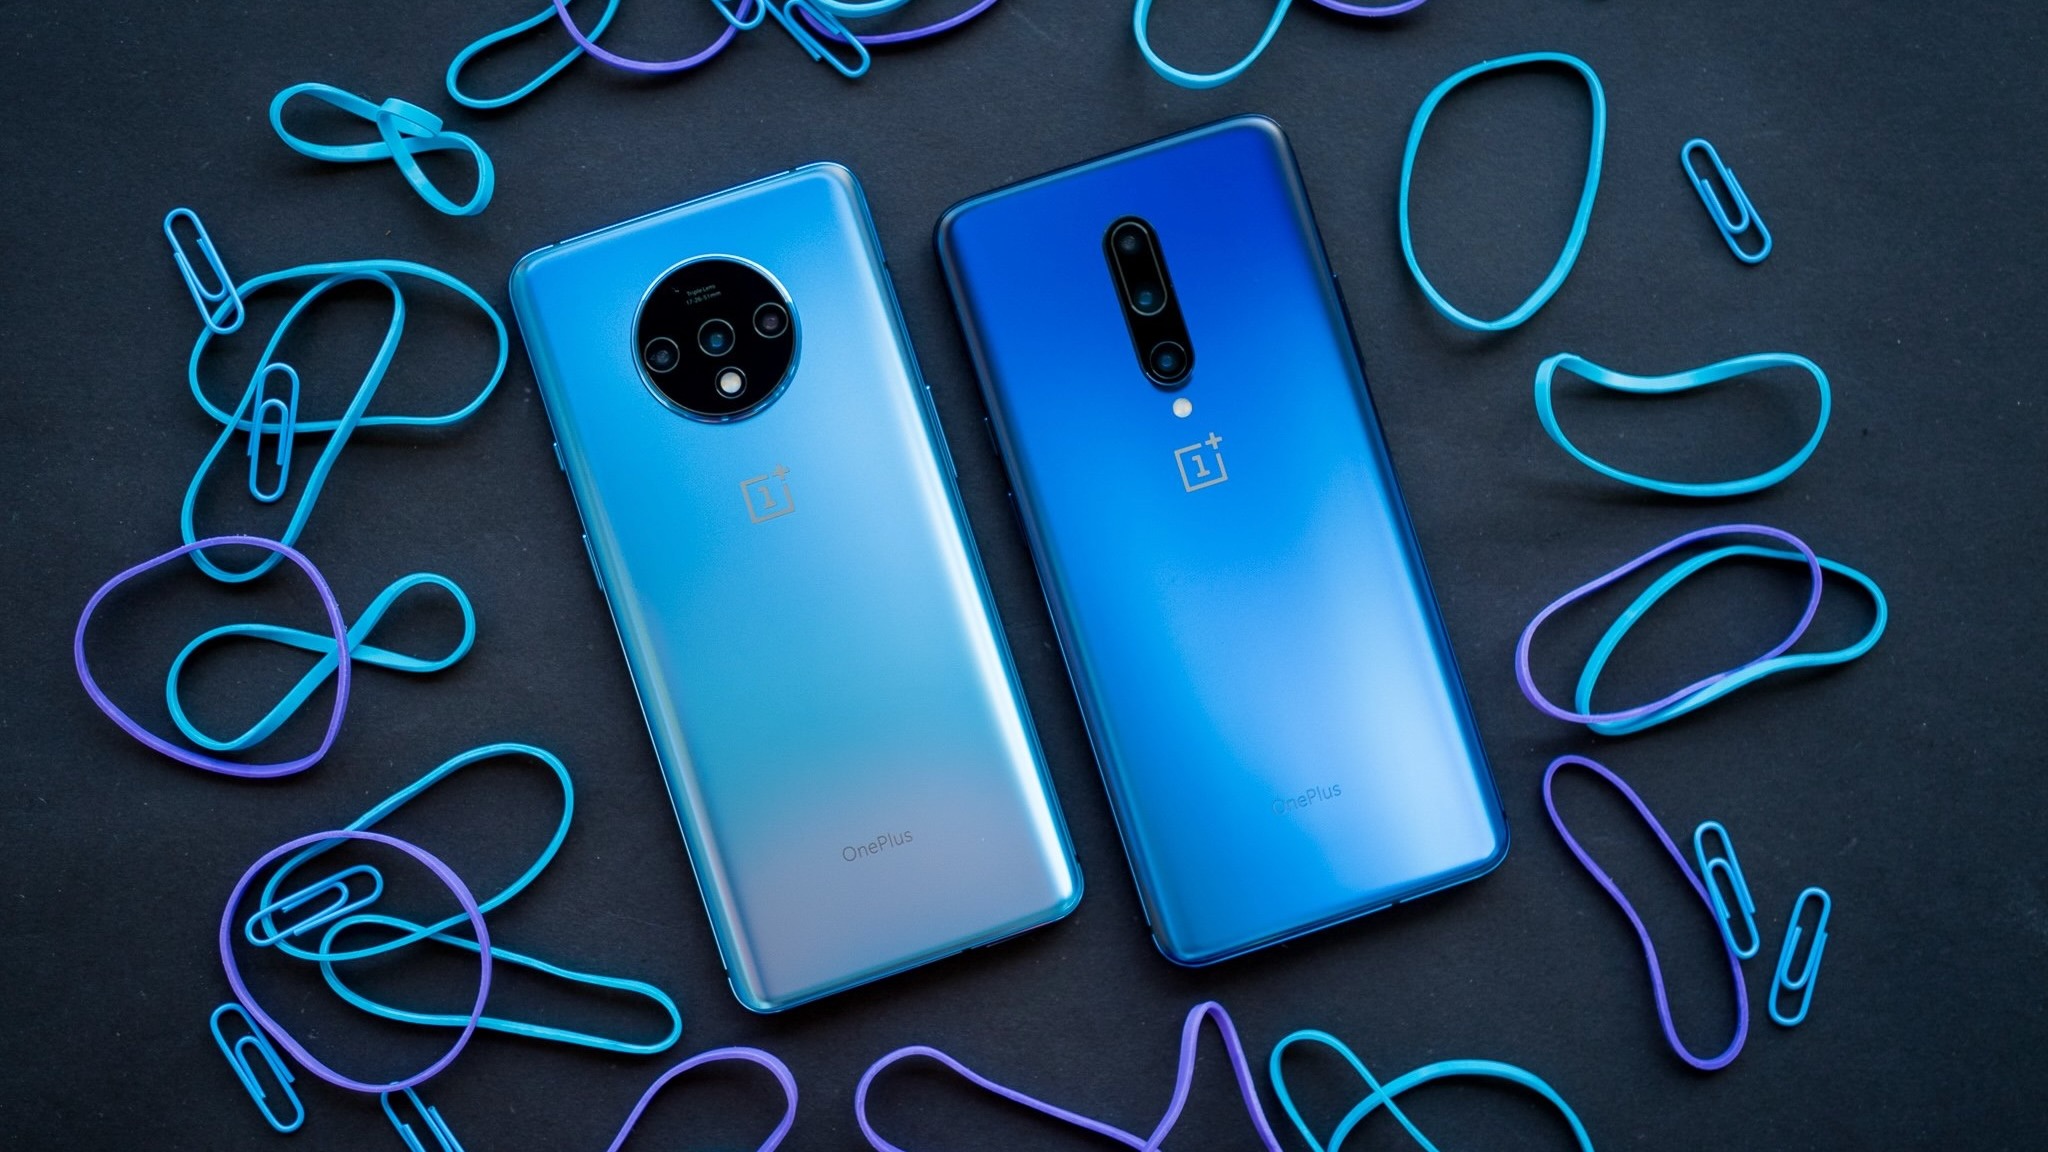 OnePlus 7 and 7T receive the